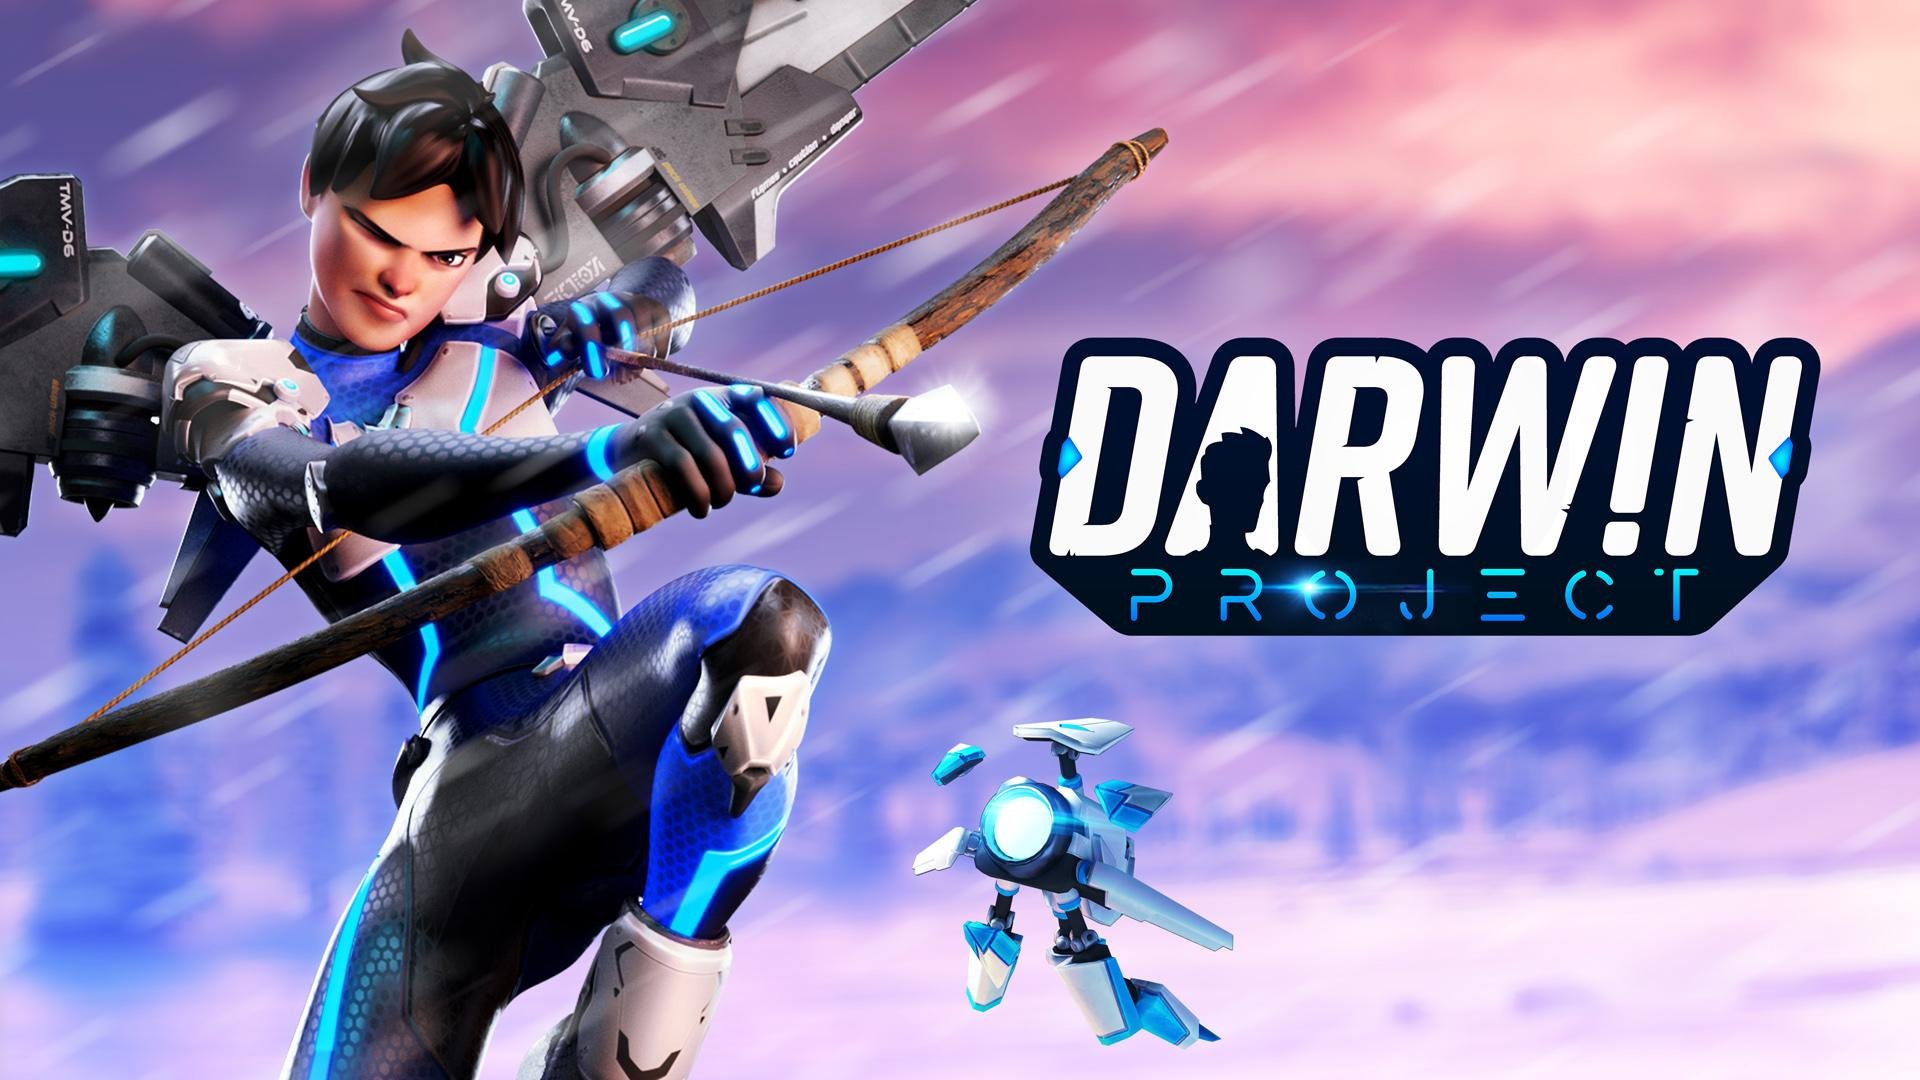 Battle Royale Game Show Darwin Project Is Out Now on PS4 - Push Square